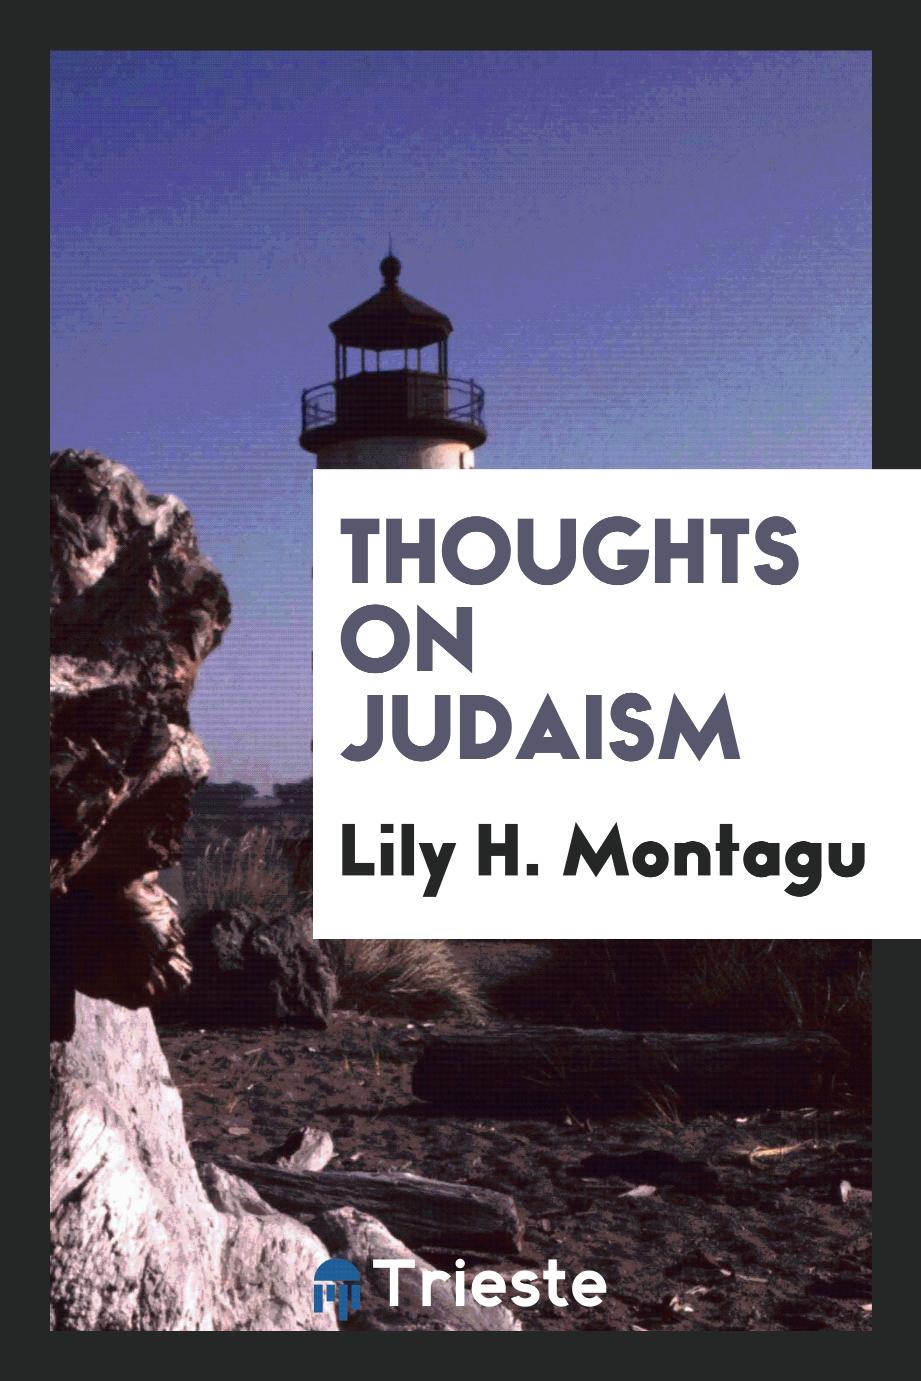 Thoughts on Judaism